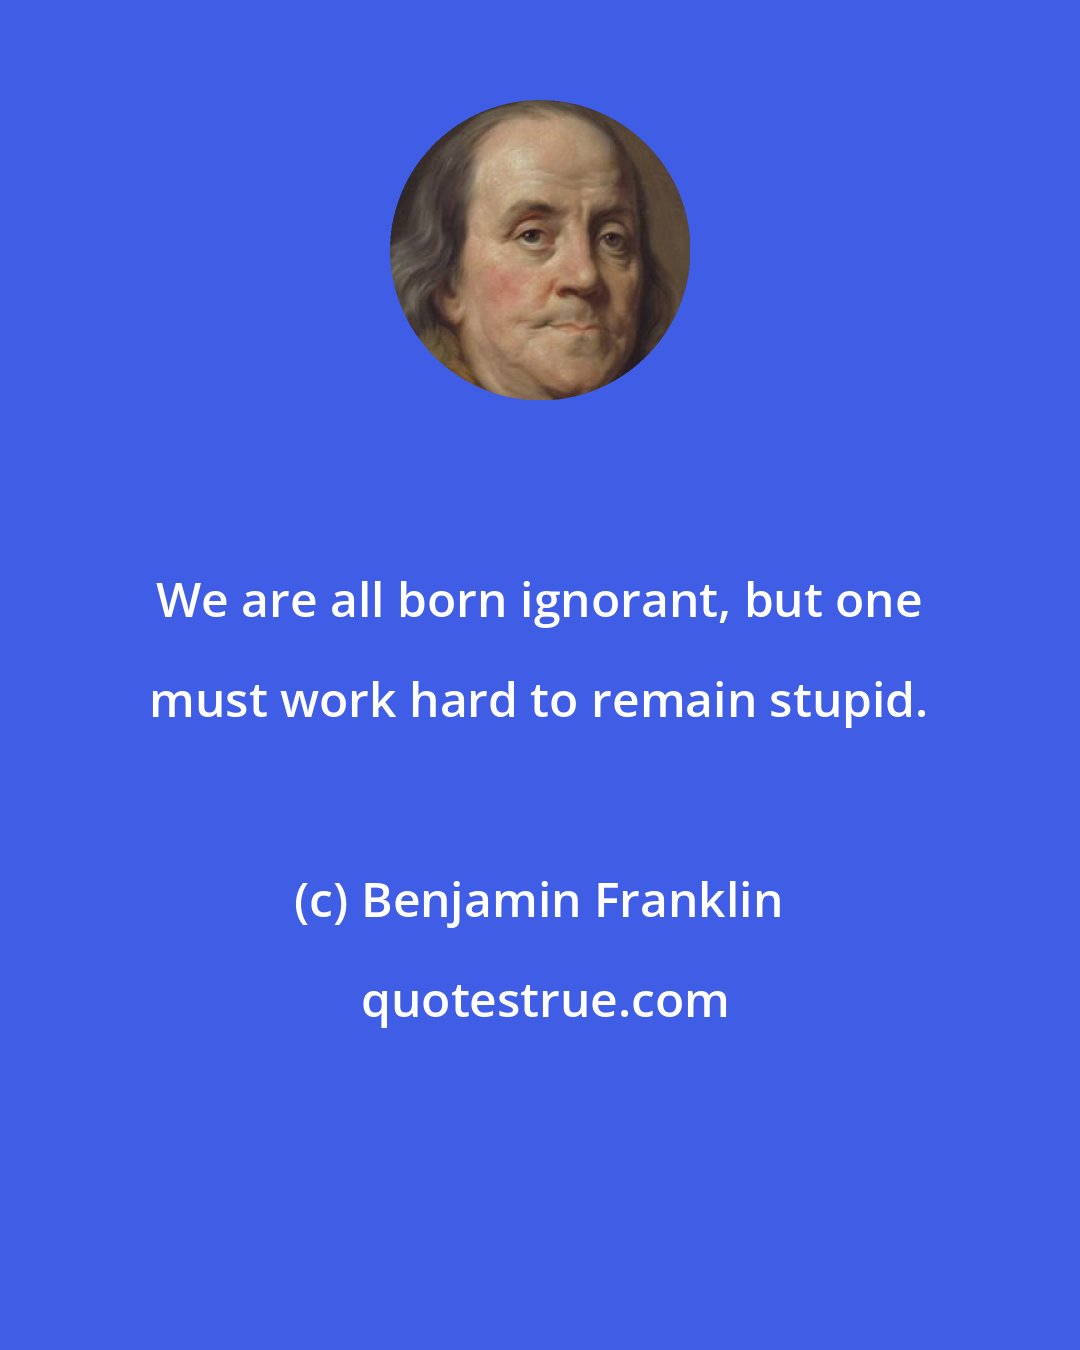 Benjamin Franklin: We are all born ignorant, but one must work hard to remain stupid.